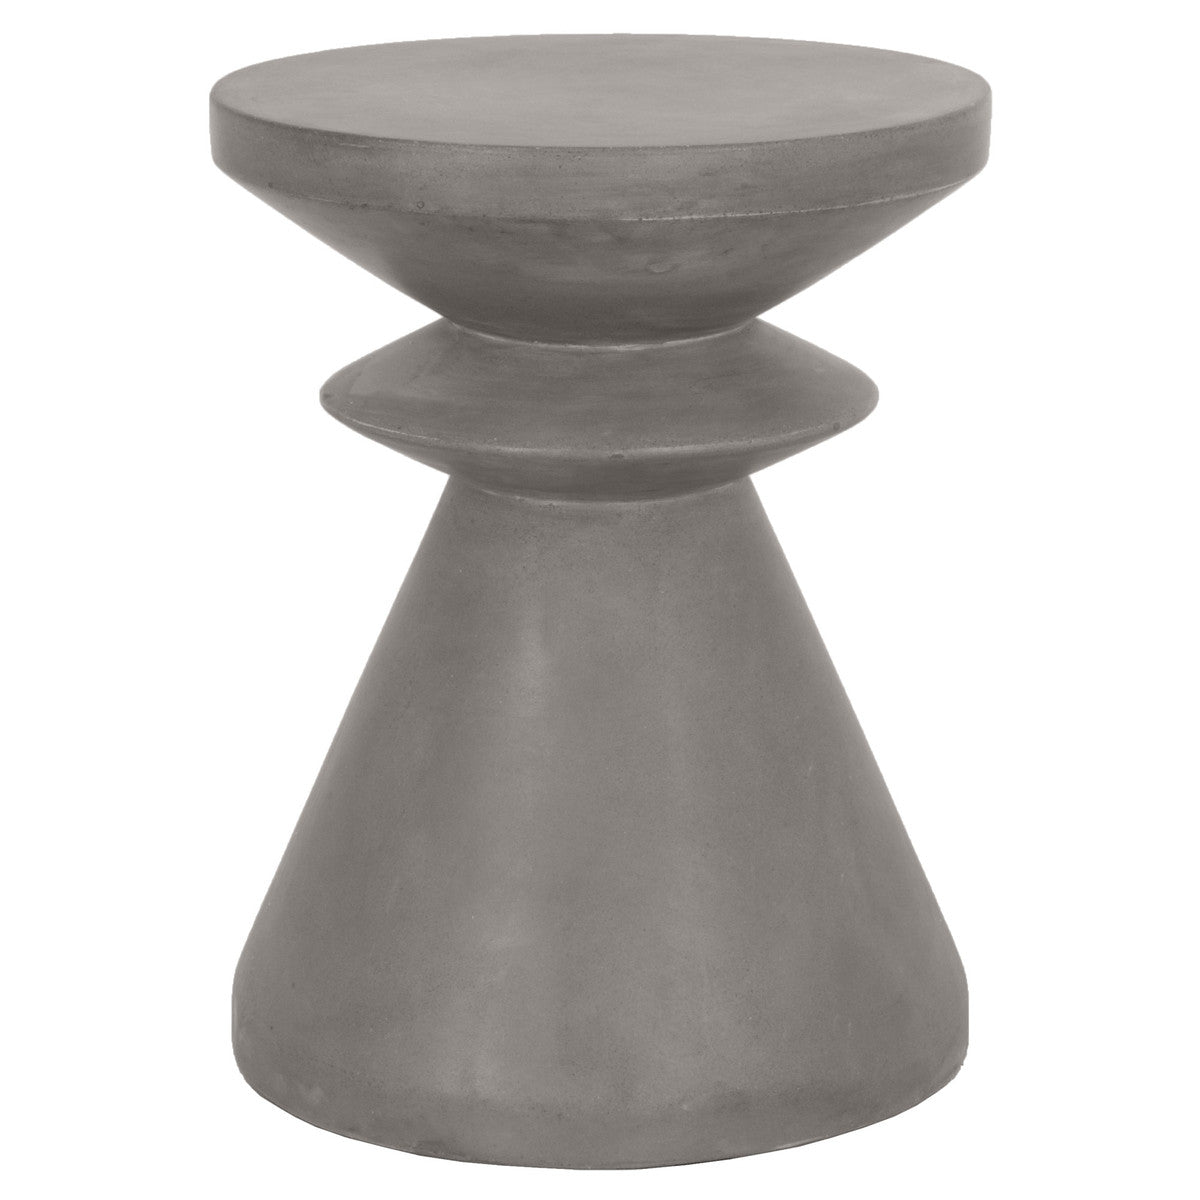 Pawn Accent Table in Slate Gray Concrete - 4612.SLA-GRY